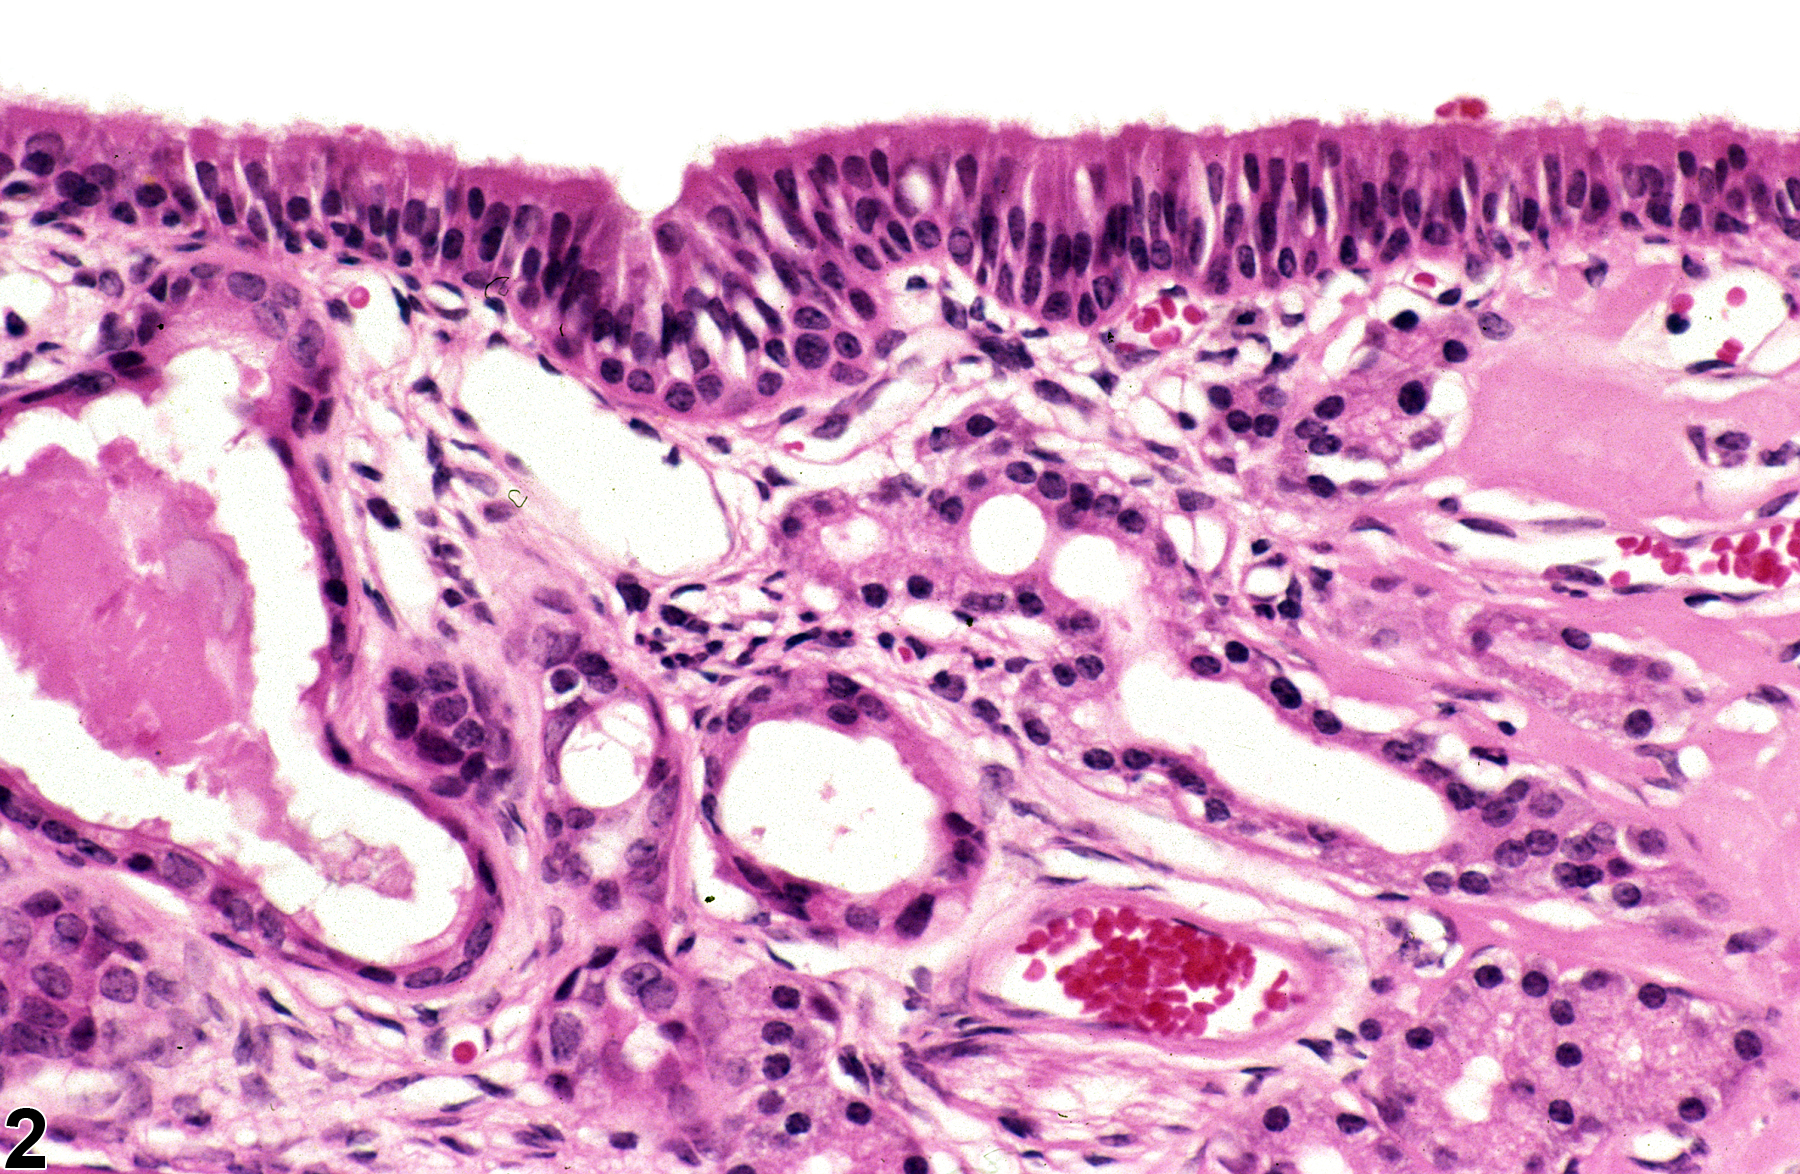 Image of hyperplasia in the nose, respiratory epithelium from a female B6C3F1/N mouse in a chronic study